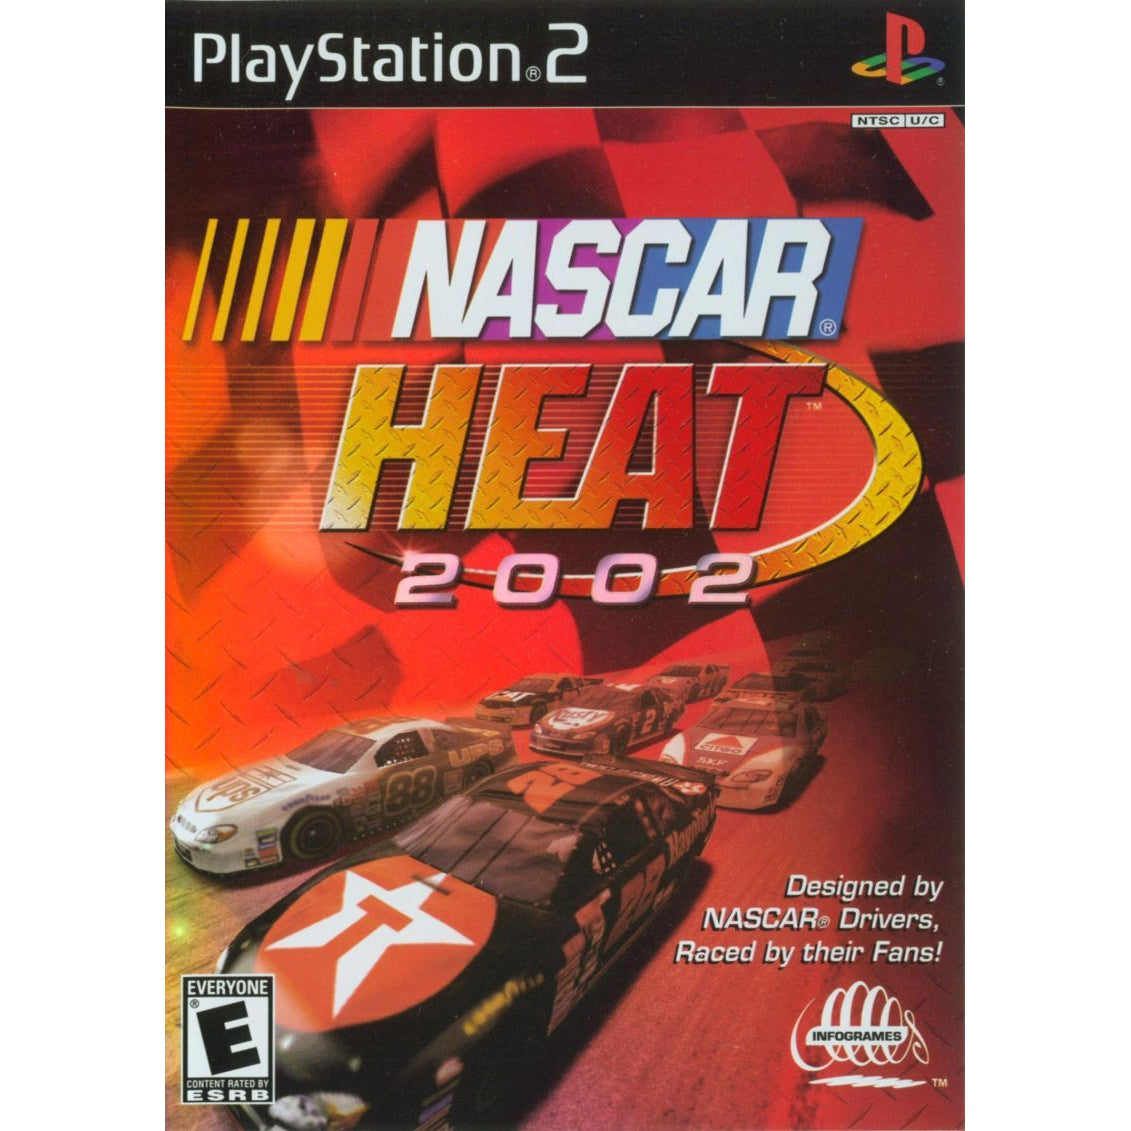 NASCAR Heat 2002 - PlayStation 2 (PS2) Game Complete - YourGamingShop.com - Buy, Sell, Trade Video Games Online. 120 Day Warranty. Satisfaction Guaranteed.